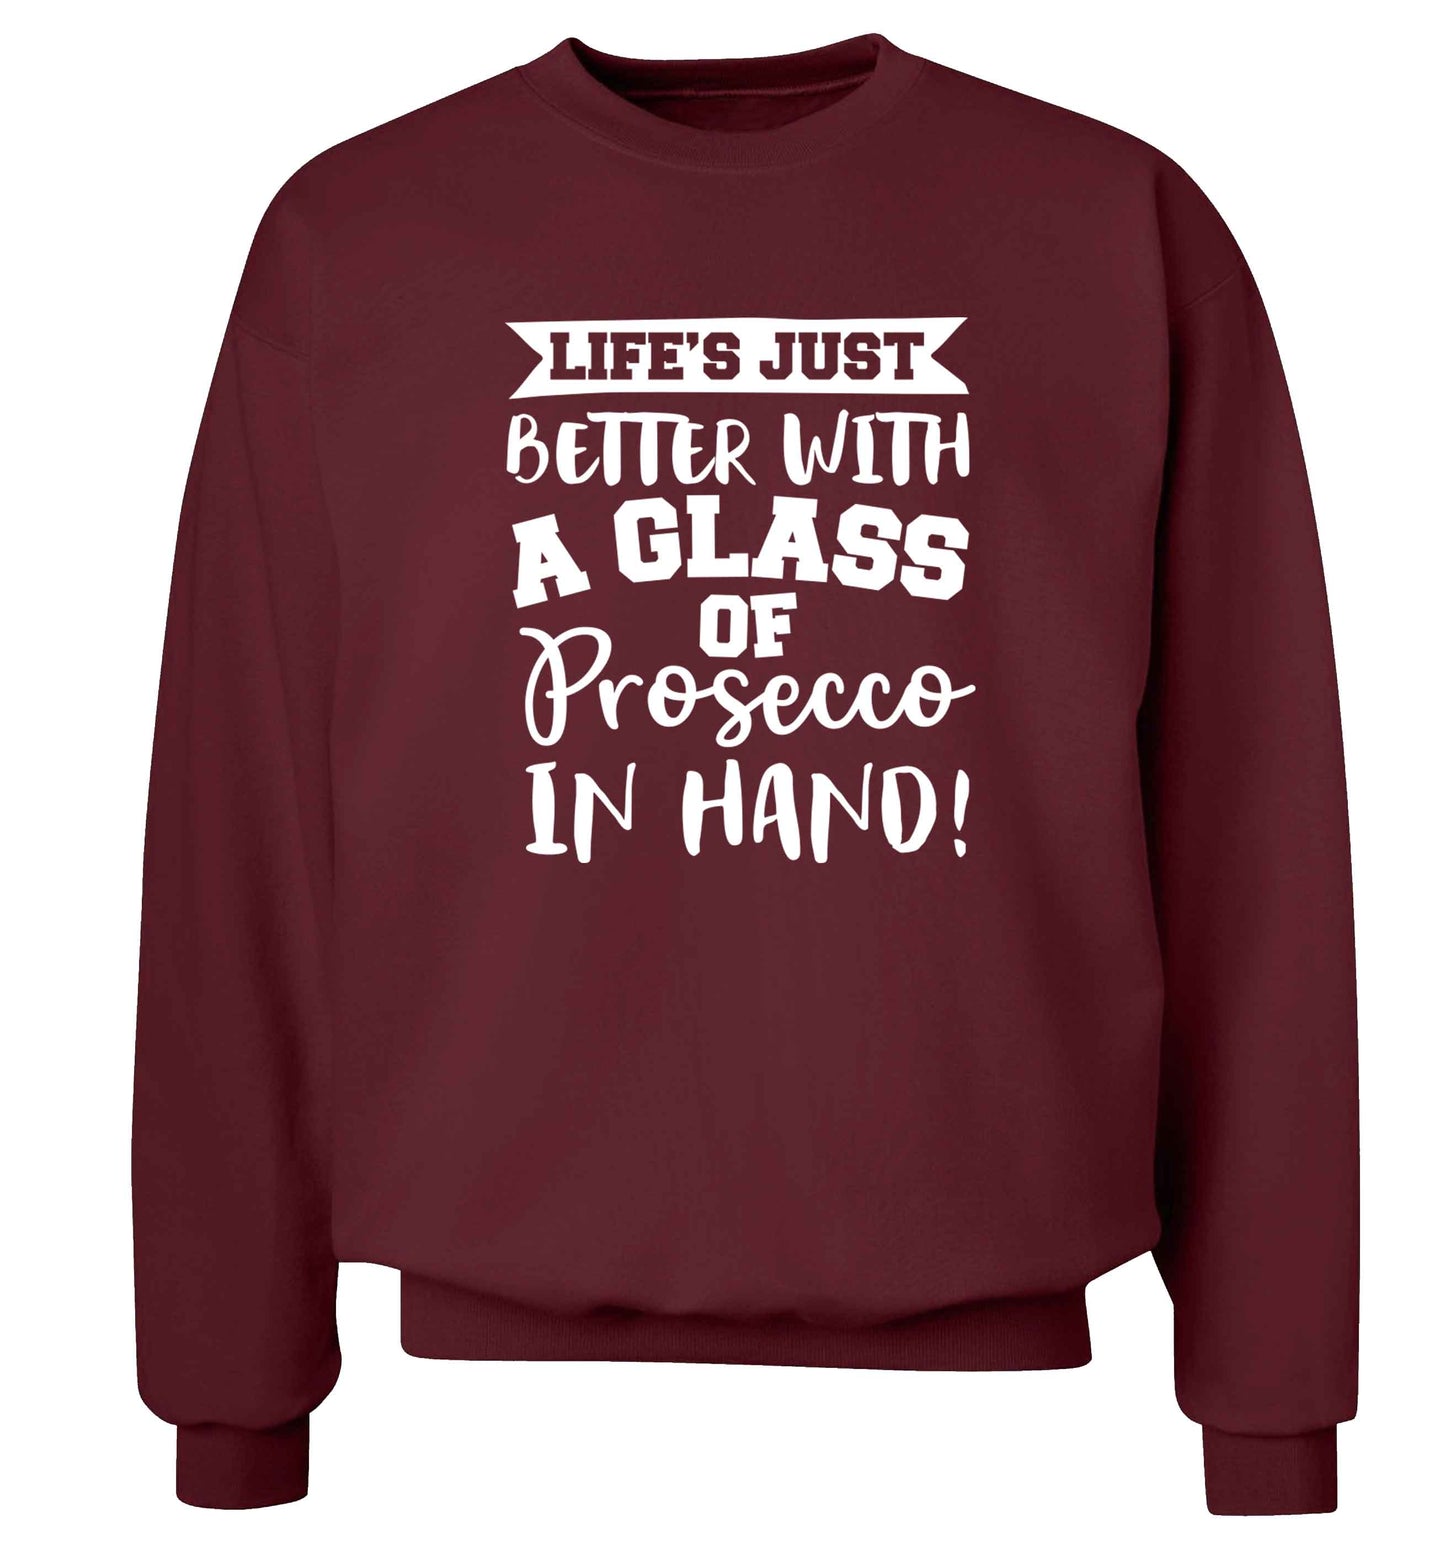 Life's just better with a glass of prosecco in hand Adult's unisex maroon Sweater 2XL